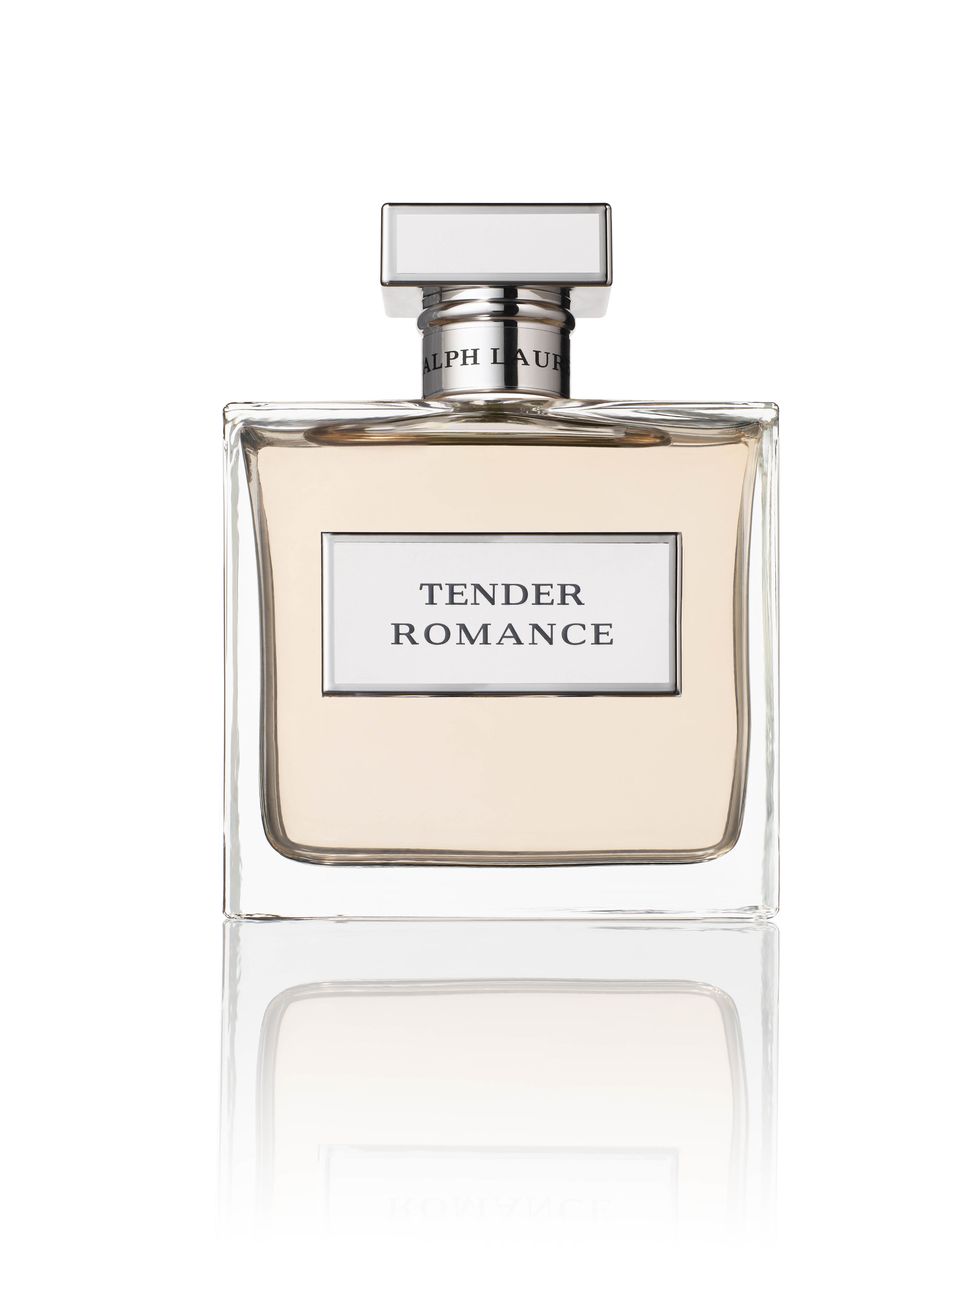 <p>Whether you met your boo through friends or on Tinder, a whiff of this warm-hug of a scent will remind you of the moment you fell in love. And if you're single, the romantic blend of ginger, bergamot, jasmine, and musk just might catch a certain someone's attention. </p><p><br></p><p>$96, for fl. 3.4 oz., <a href="http://www.ralphlauren.com/product/index.jsp?productId=88842646&ab=cs_vfd_P3_S1&prevMainProd=88842636" target="_blank">Ralphlauren.com</a></p>